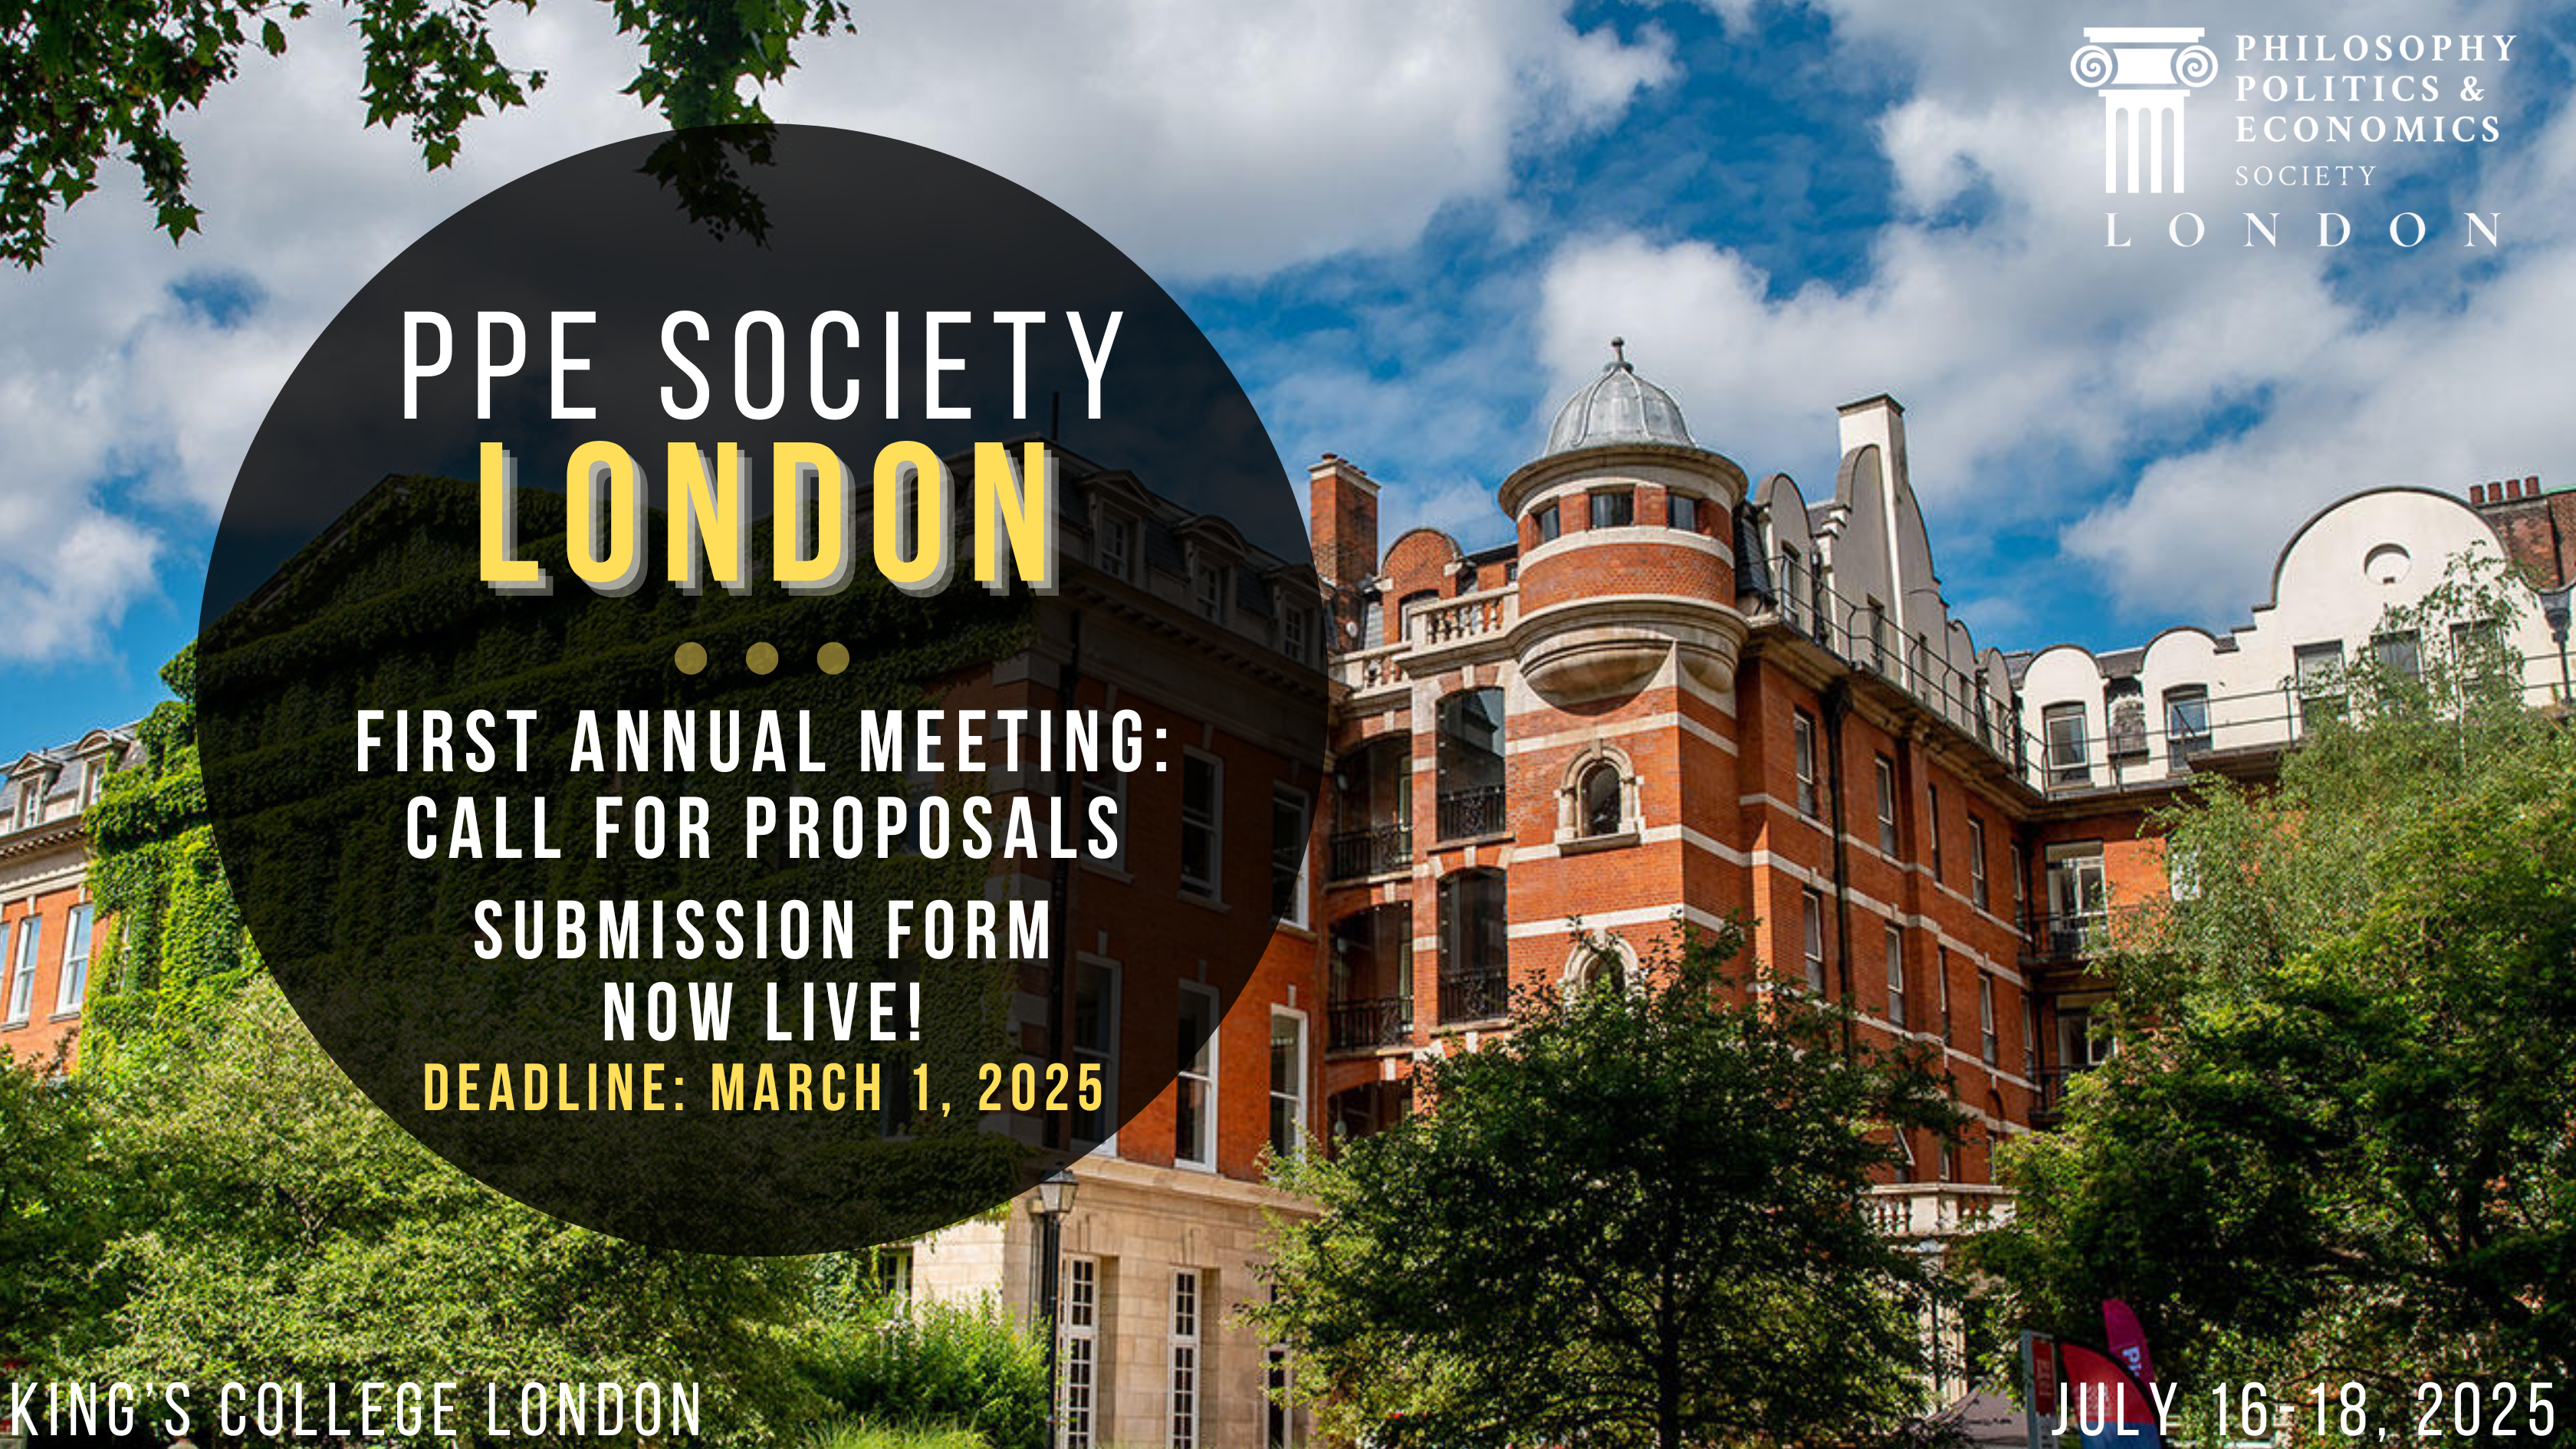 PPE Society London - First Annual Meeting: Call for Proposals submission form now live - deadline March 1, 2025.